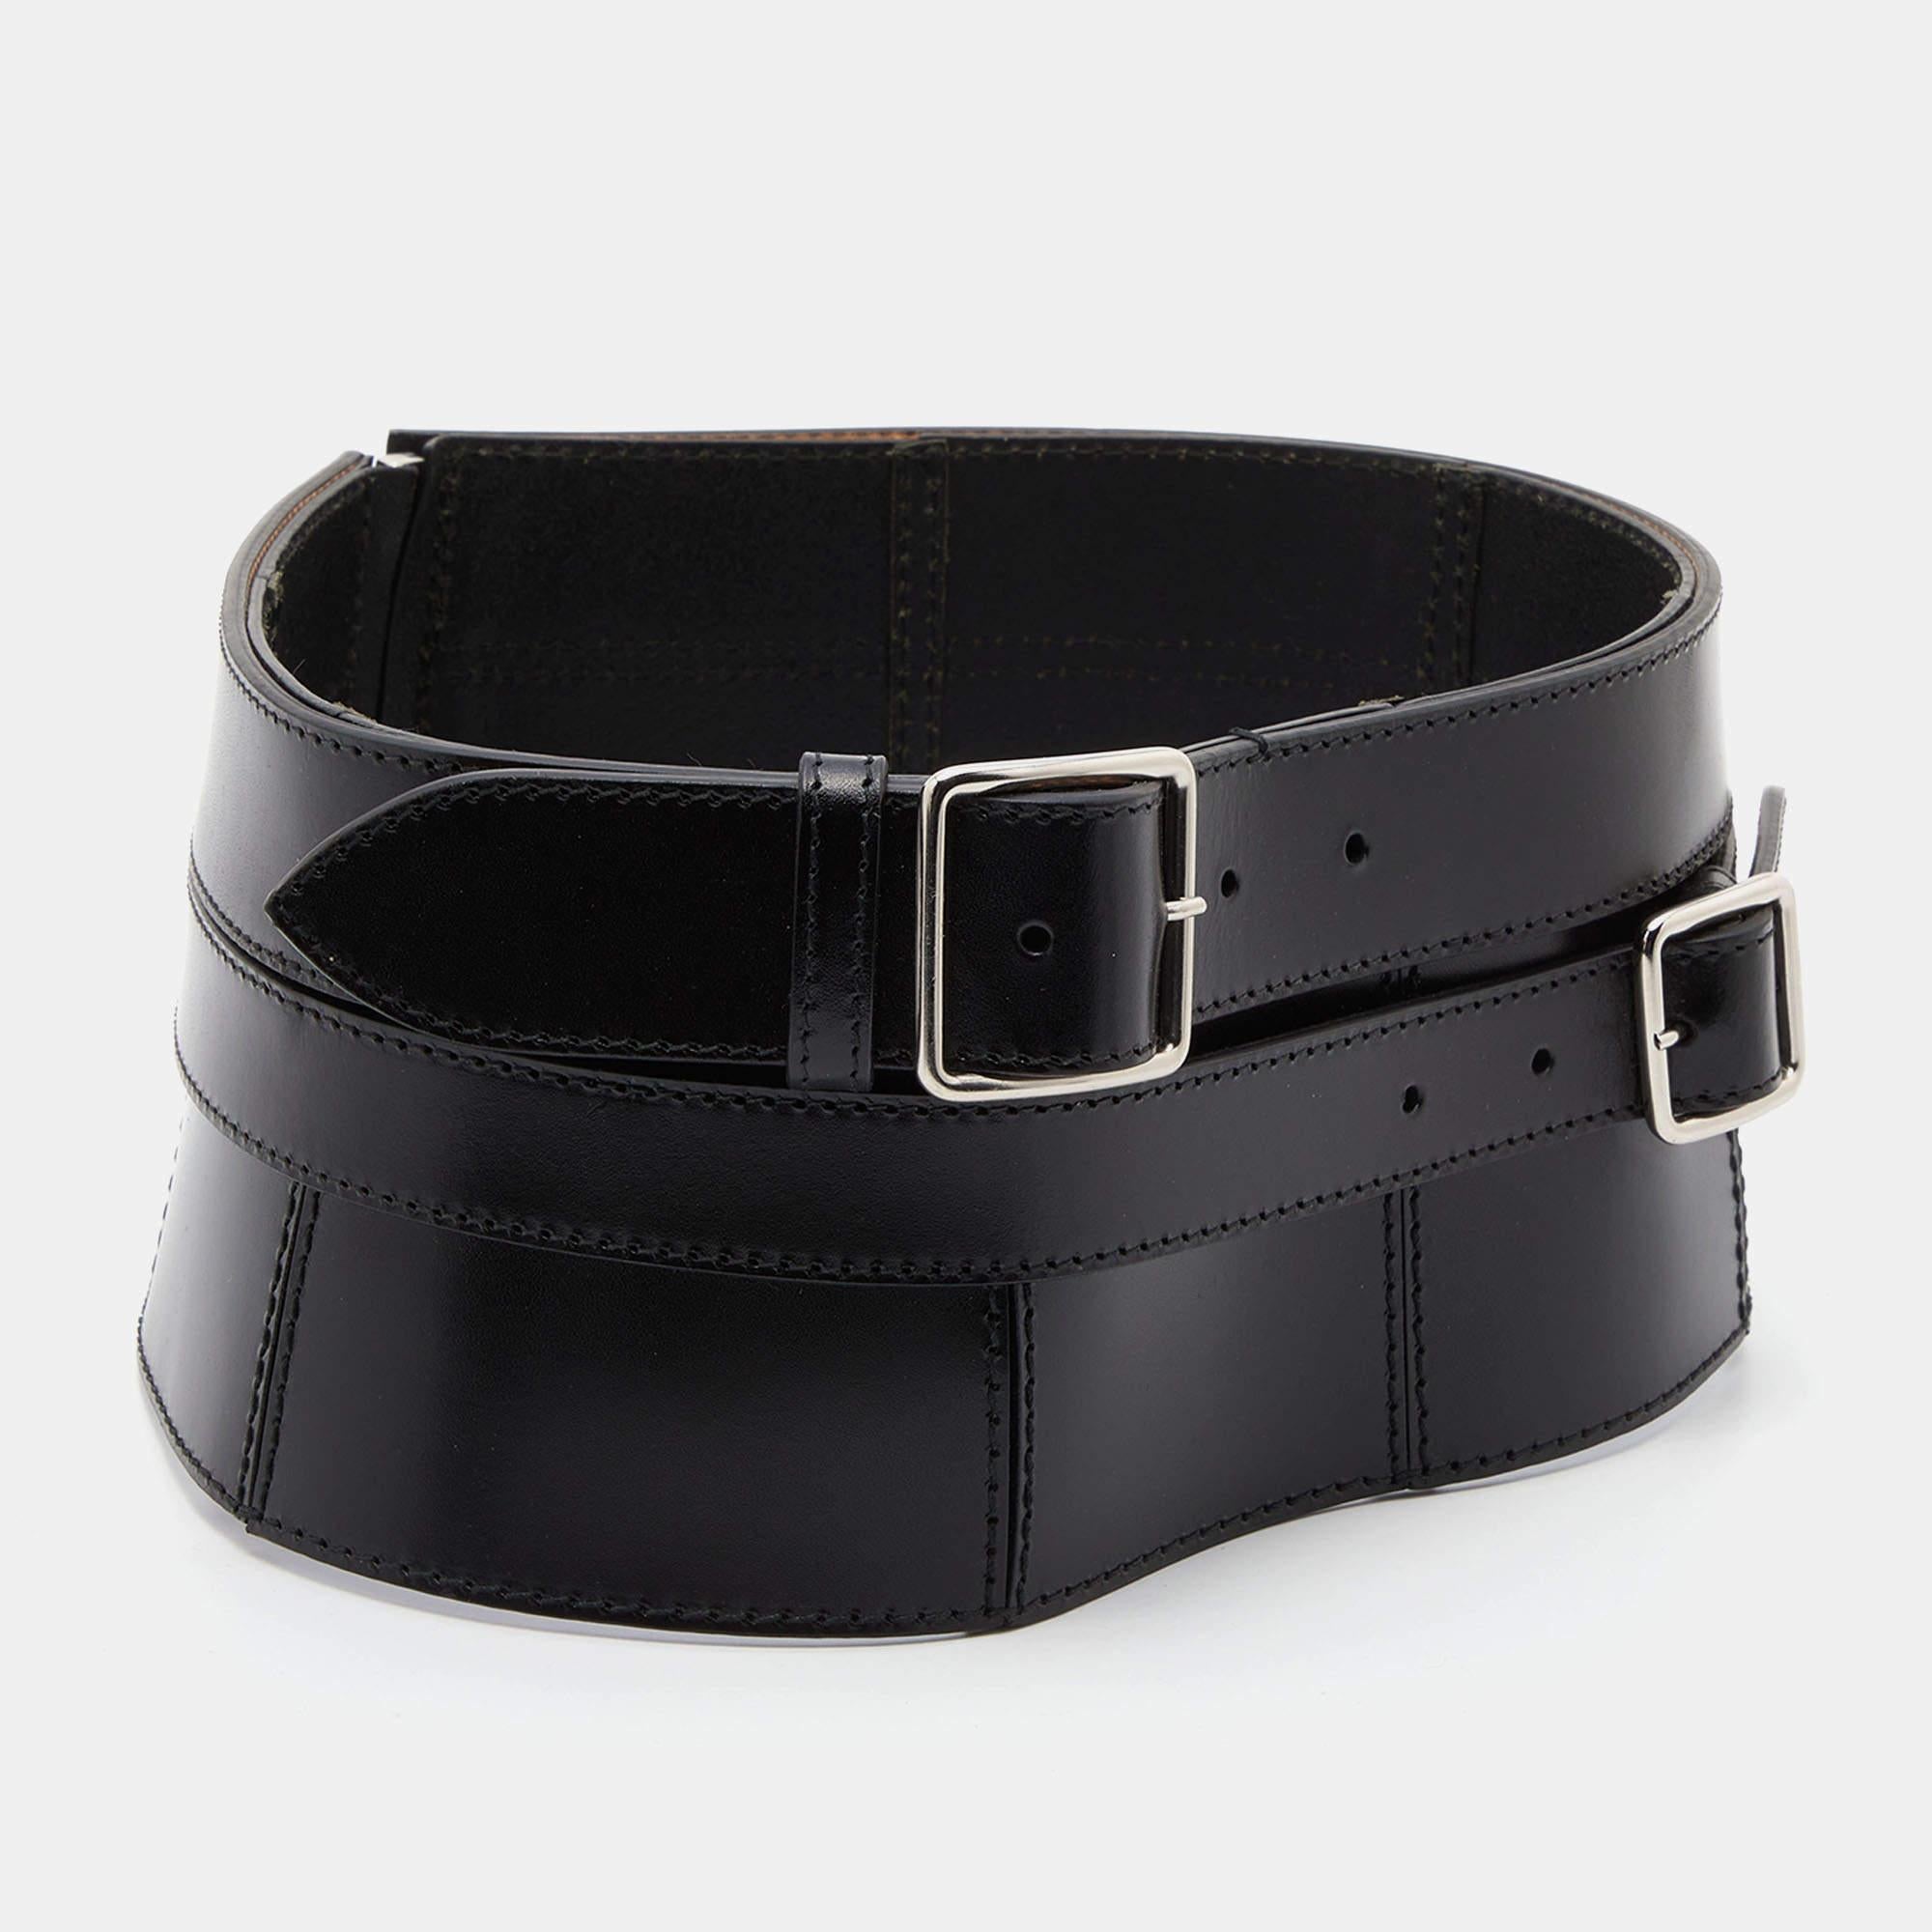 Belts are fine accessories to upgrade any basic look to a statement-making one. We particularly love this offering by Alexander McQueen. Formed using leather, the black belt has dual buckles and zip closure.

Includes: Brand Tag